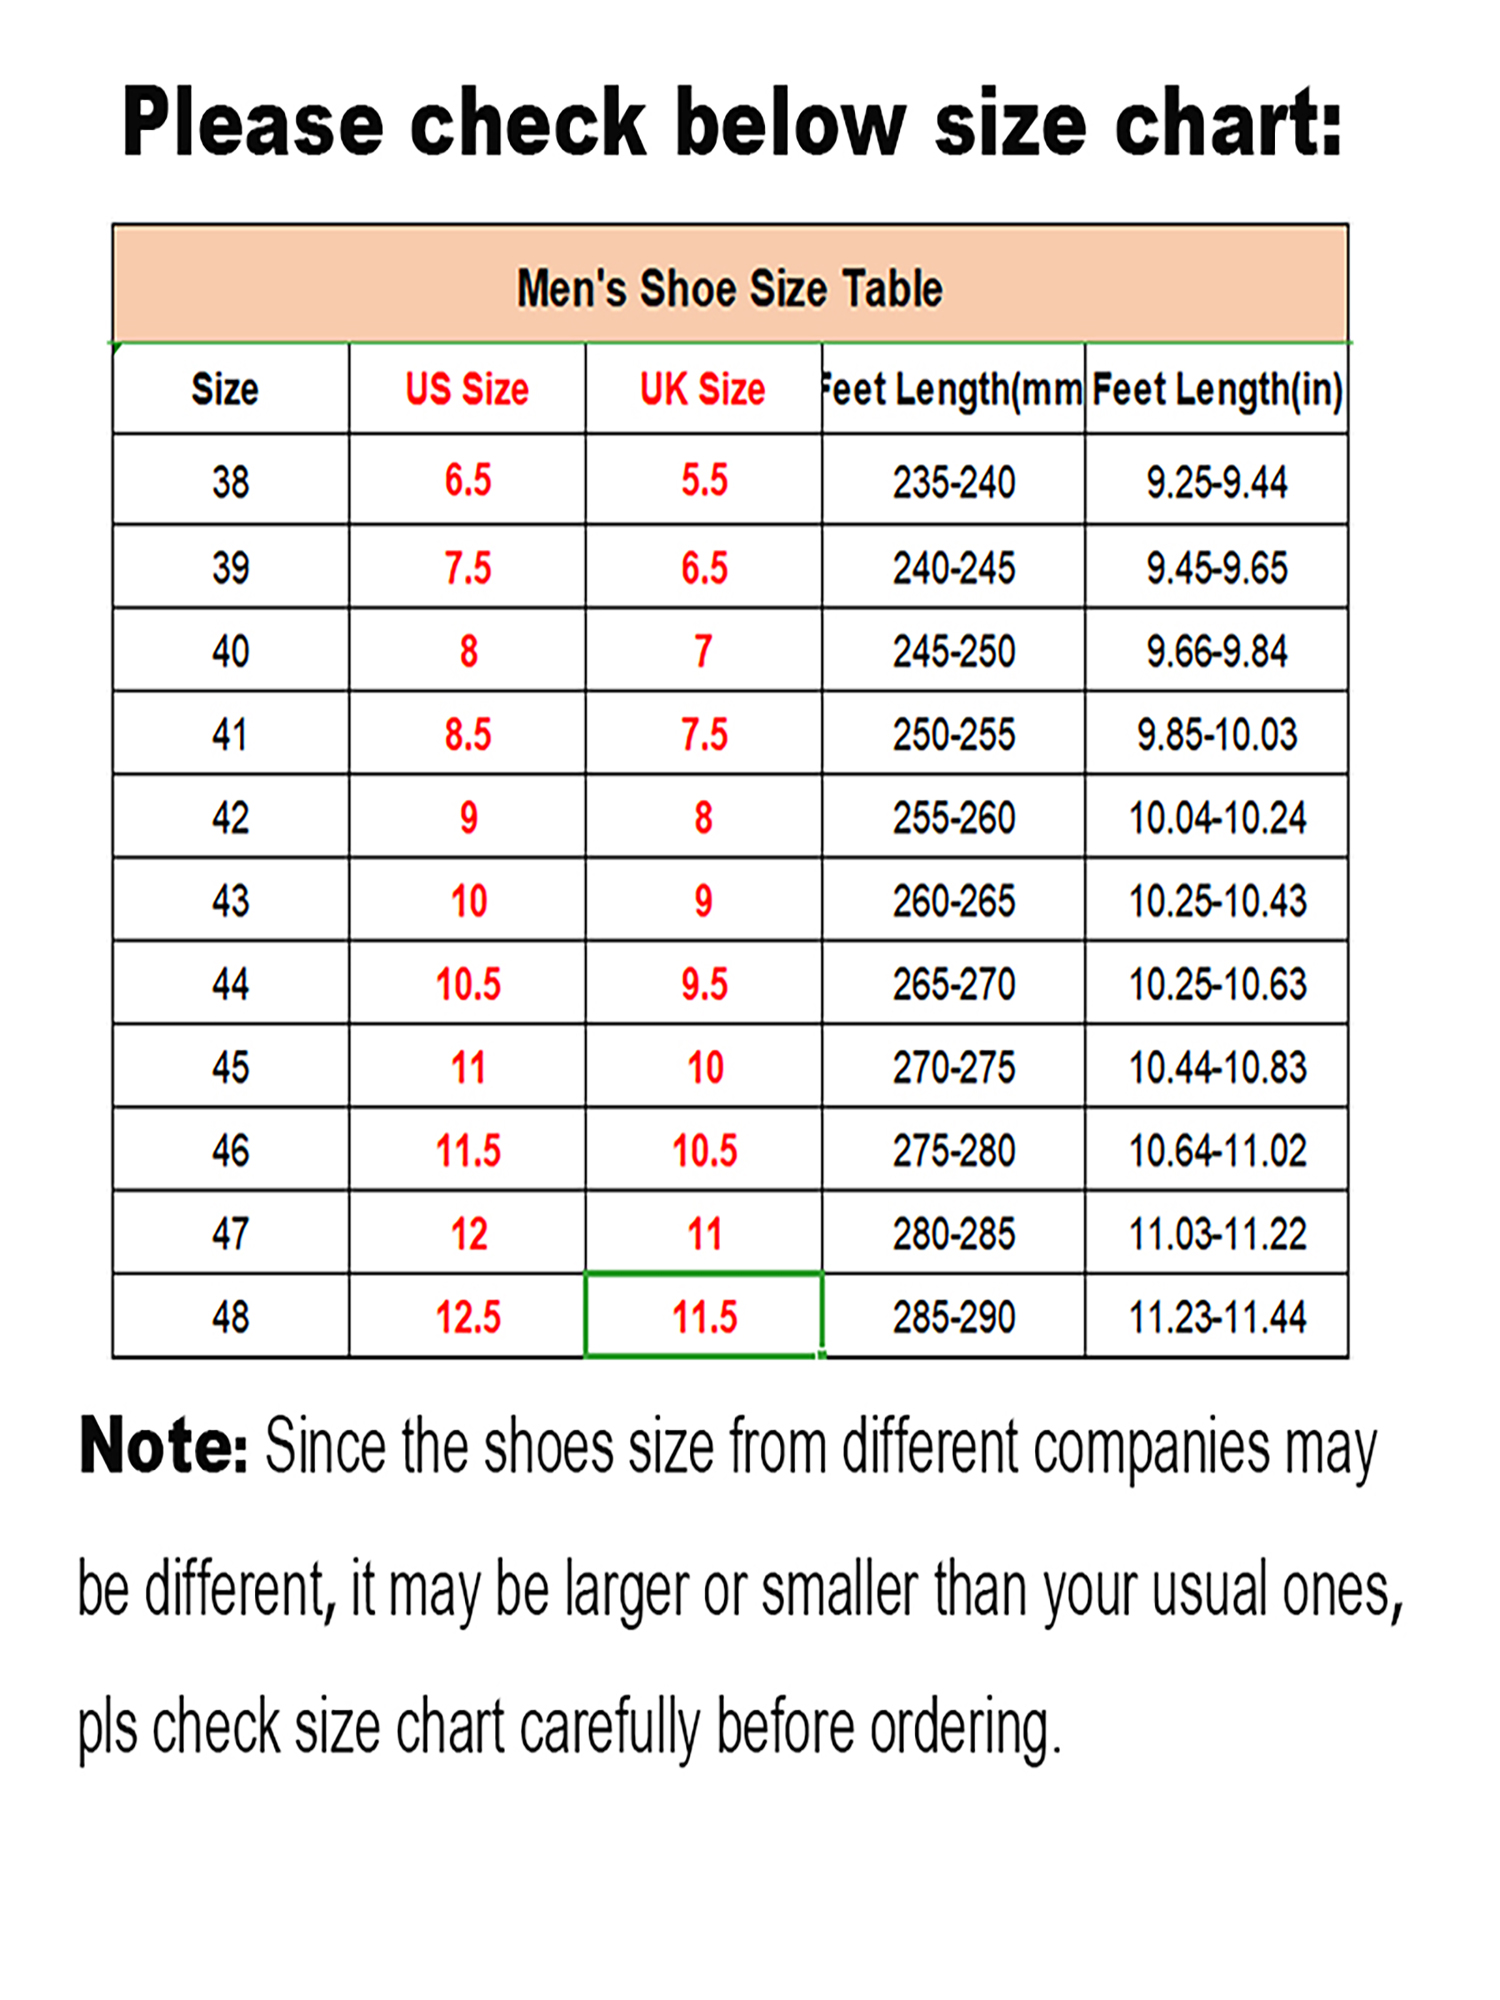 Audeban Mens Casual Leather Loafers Driving Moccasins Shoes Zipper Boots Outdoor Working Shoes - image 2 of 3